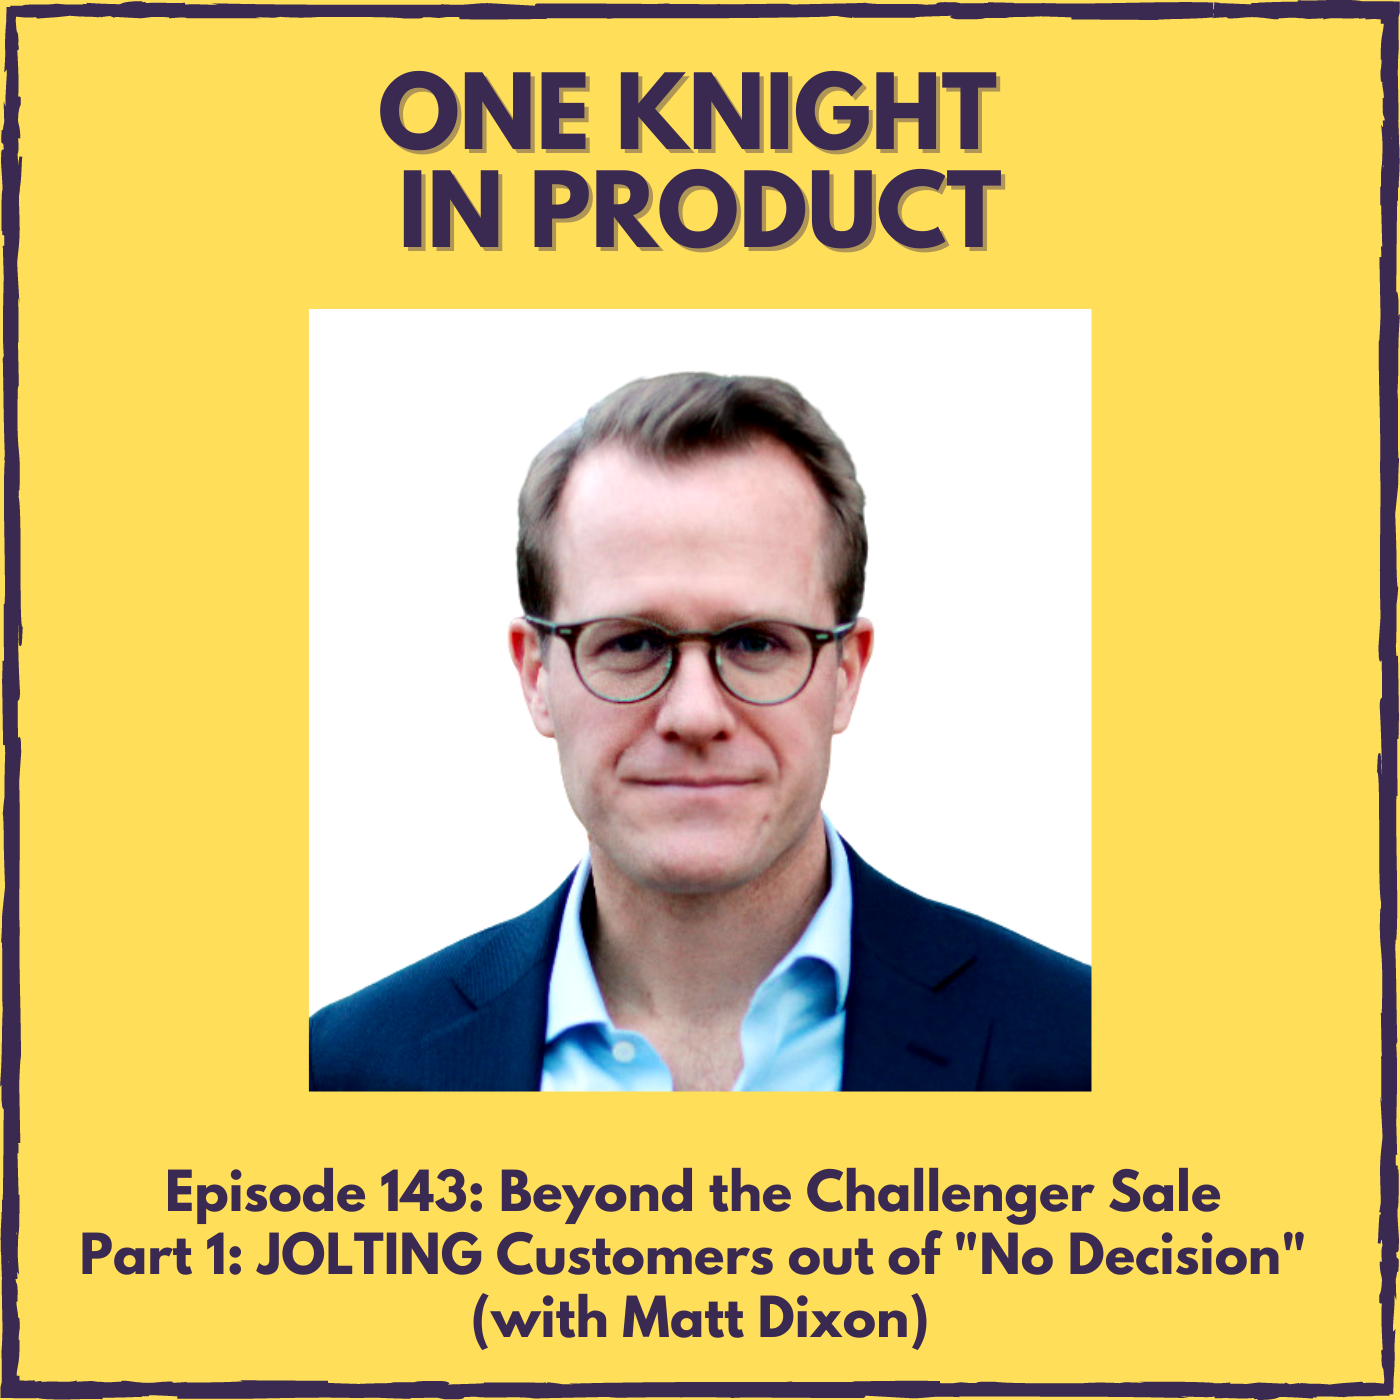 Beyond the Challenger Sale Part 1: JOLTING Customers out of ”No Decision” (with Matt Dixon, Author ”The Challenger Sale” & ”The JOLT Effect”)